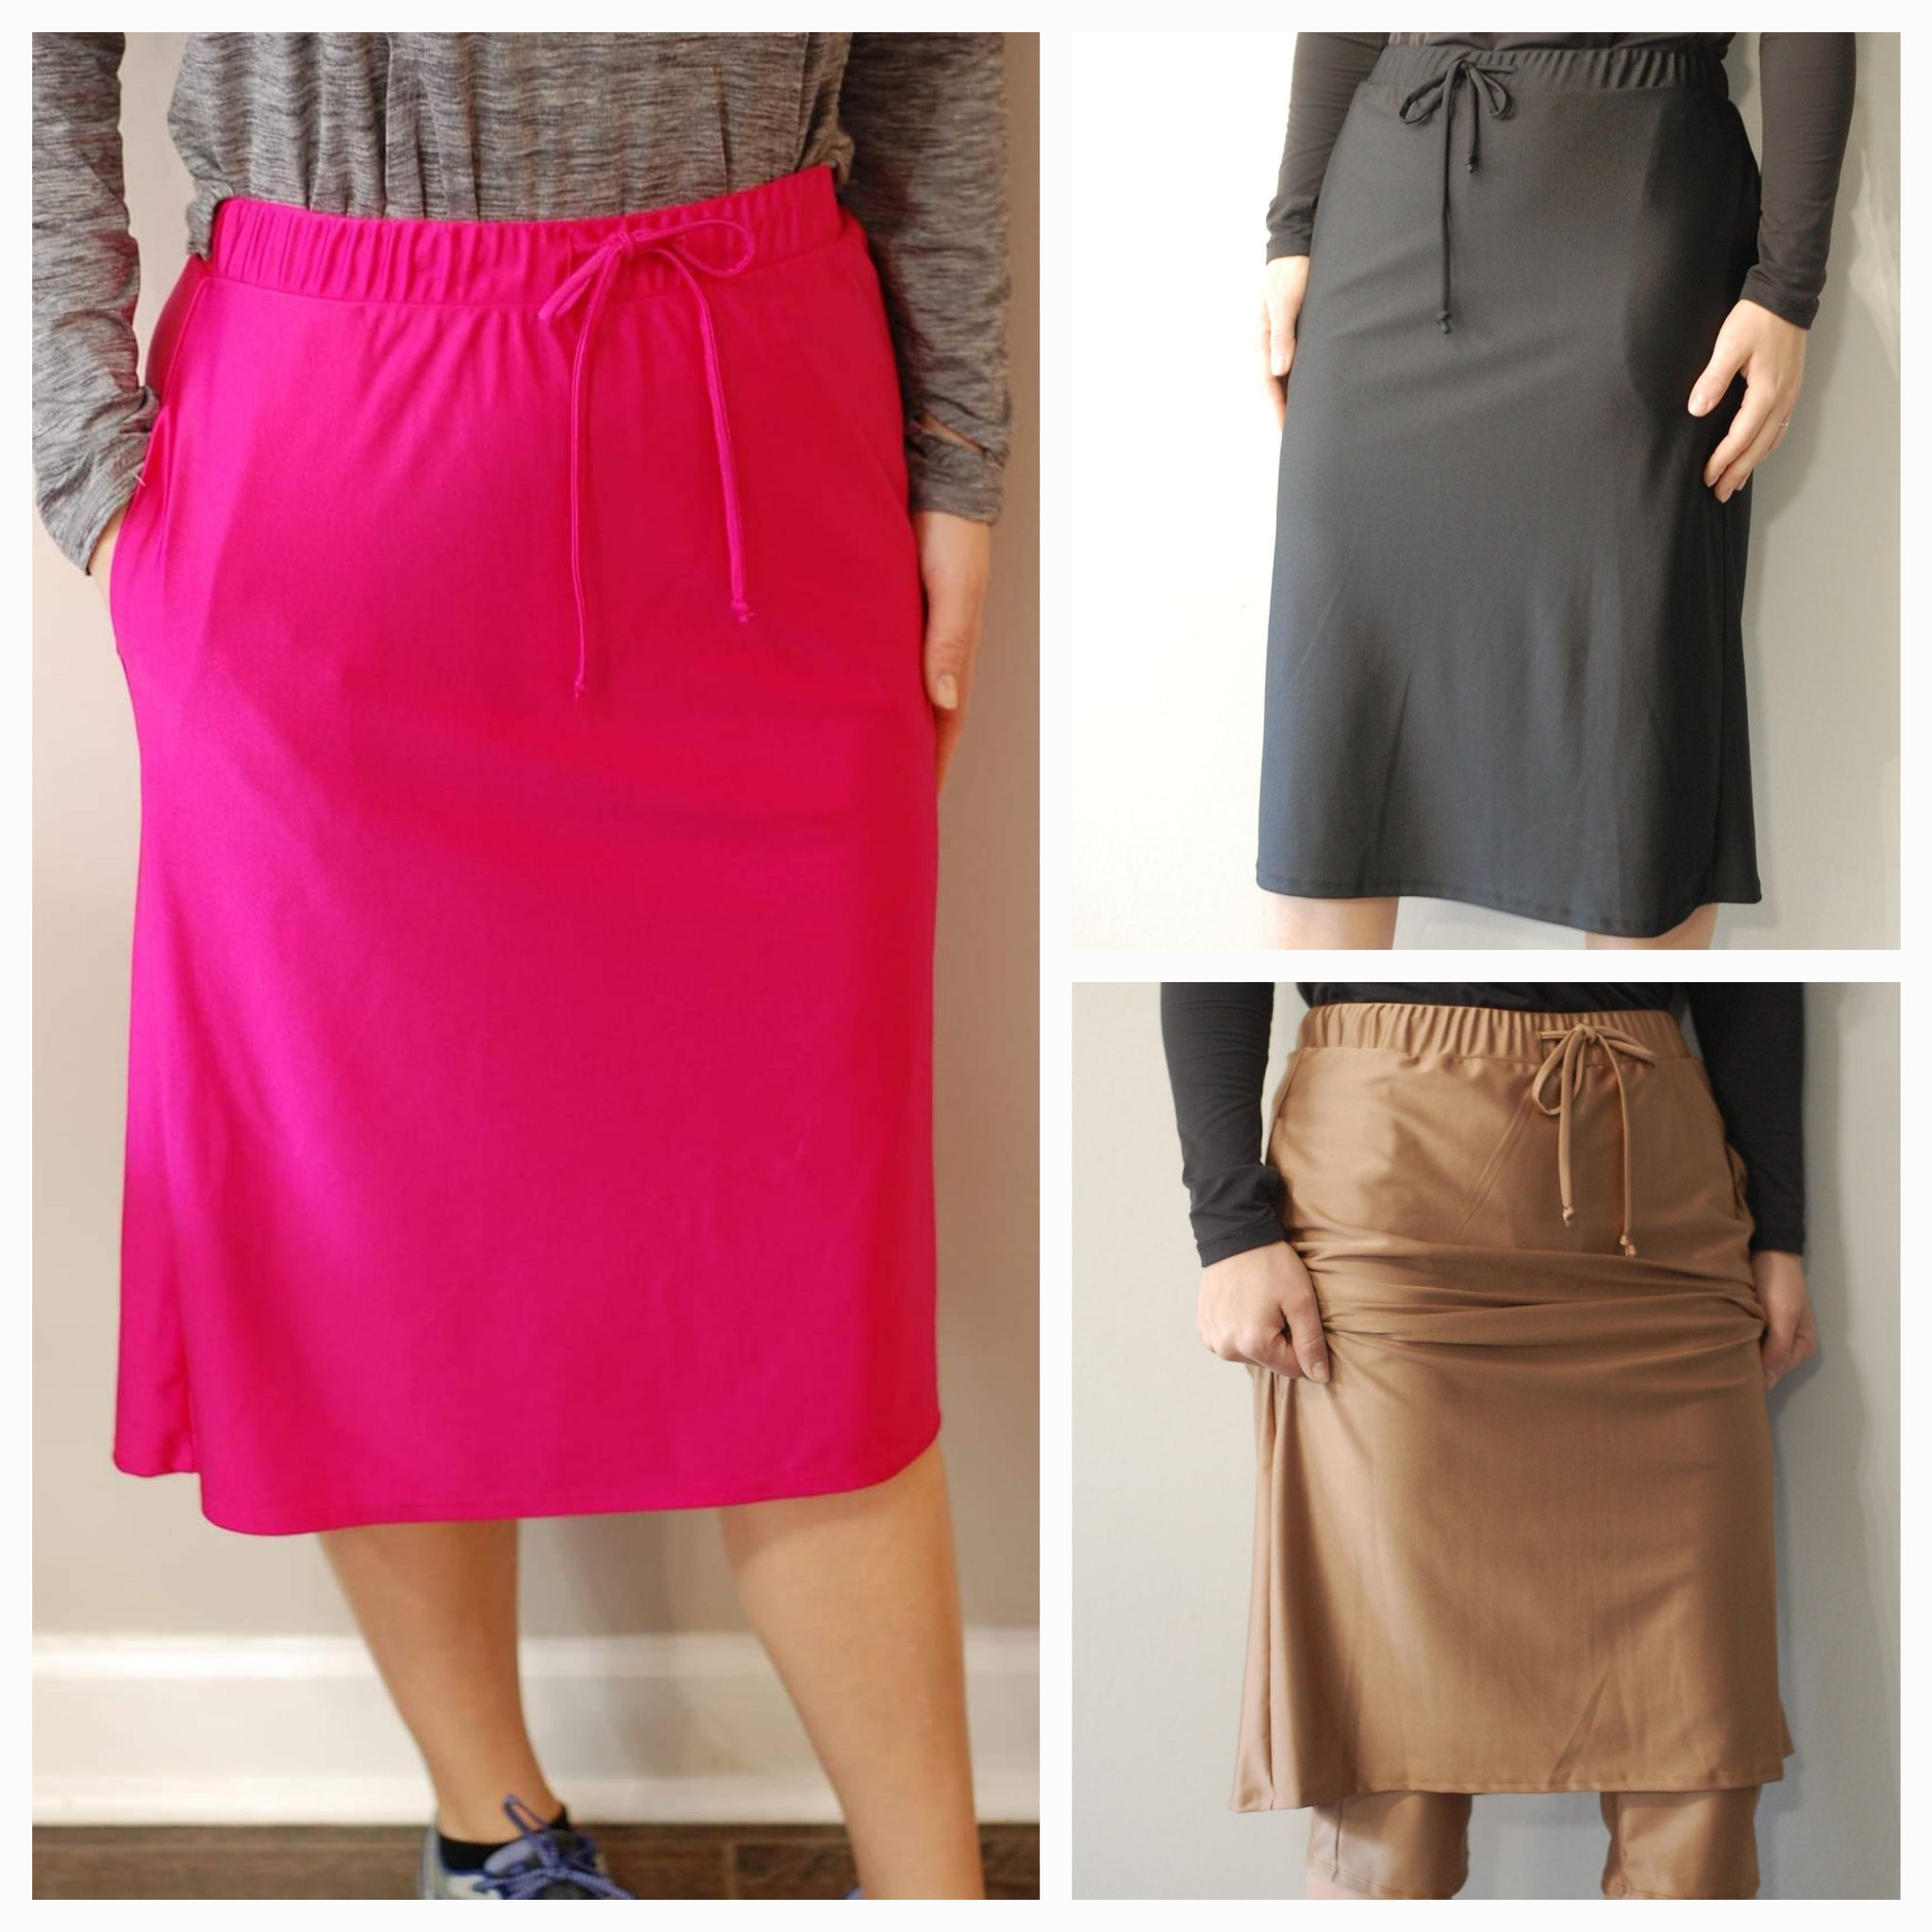 Customizable Everyday Drawstring Athletic Skirt with Built-in Shorts and Pockets